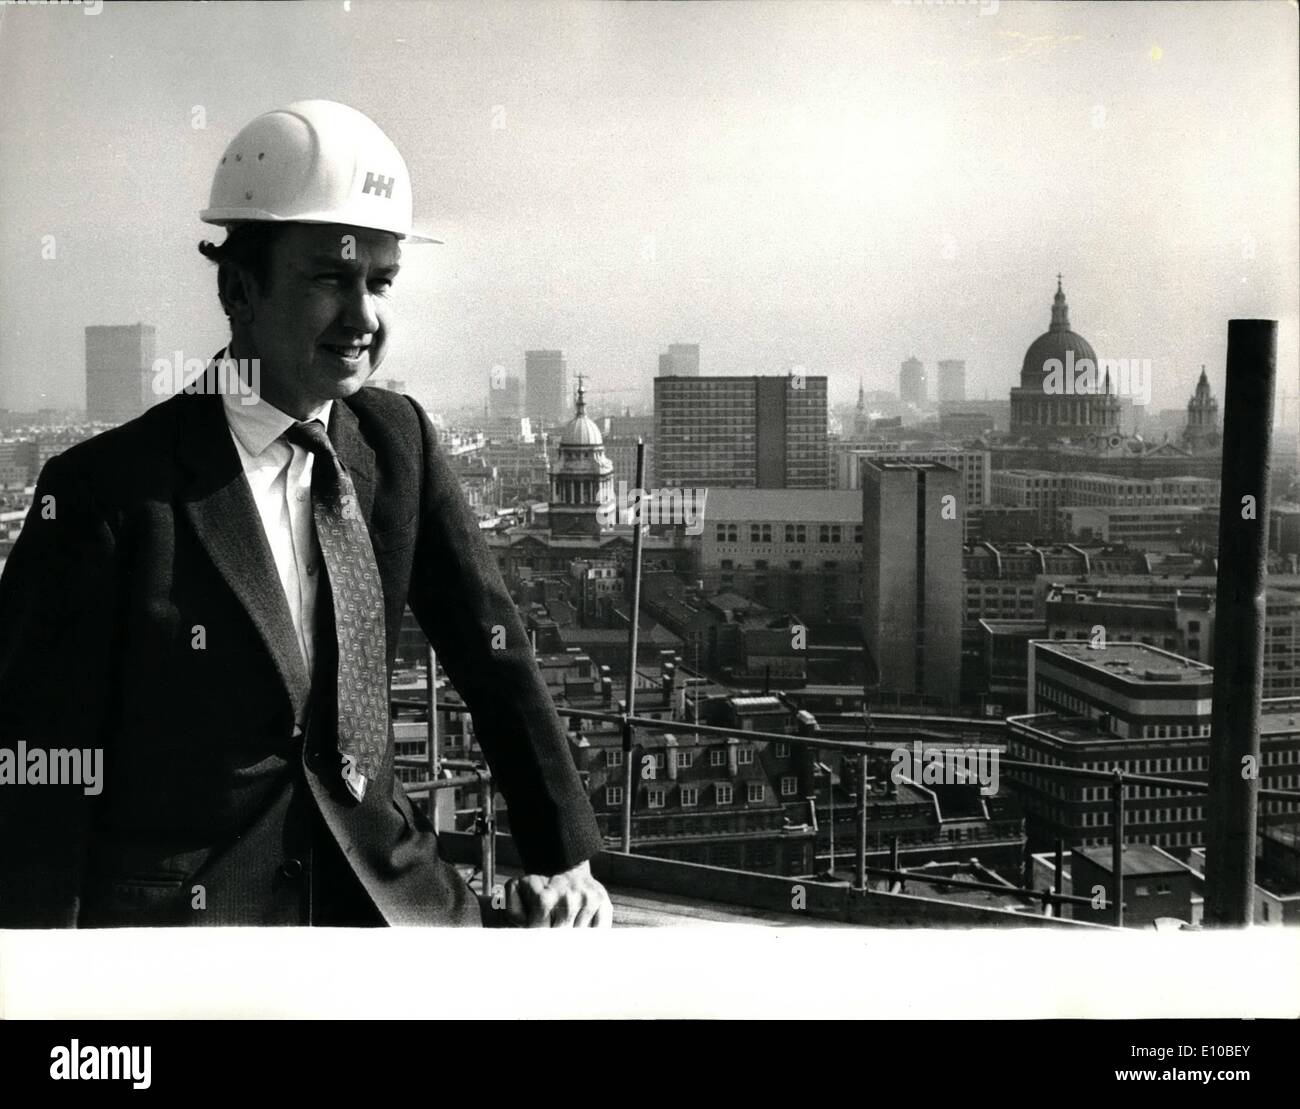 Mar. 03, 1972 - ''Topping-Out'' London International Press Centre: The Rt. Hon. Peter Walker M.P., Secretary of State, Department of the Environment, this morning performed the traditional ''Topping-out'' ceremony of the new International Press Centre, Shoe Lane, London E.C.4.. The new center has been designed to carry many requirements for the general press, with radio station, conference rooms plus other facilities and will also provide the new Headquarters off the Press Club.. Keystone Photo Shows:- Mr Stock Photo